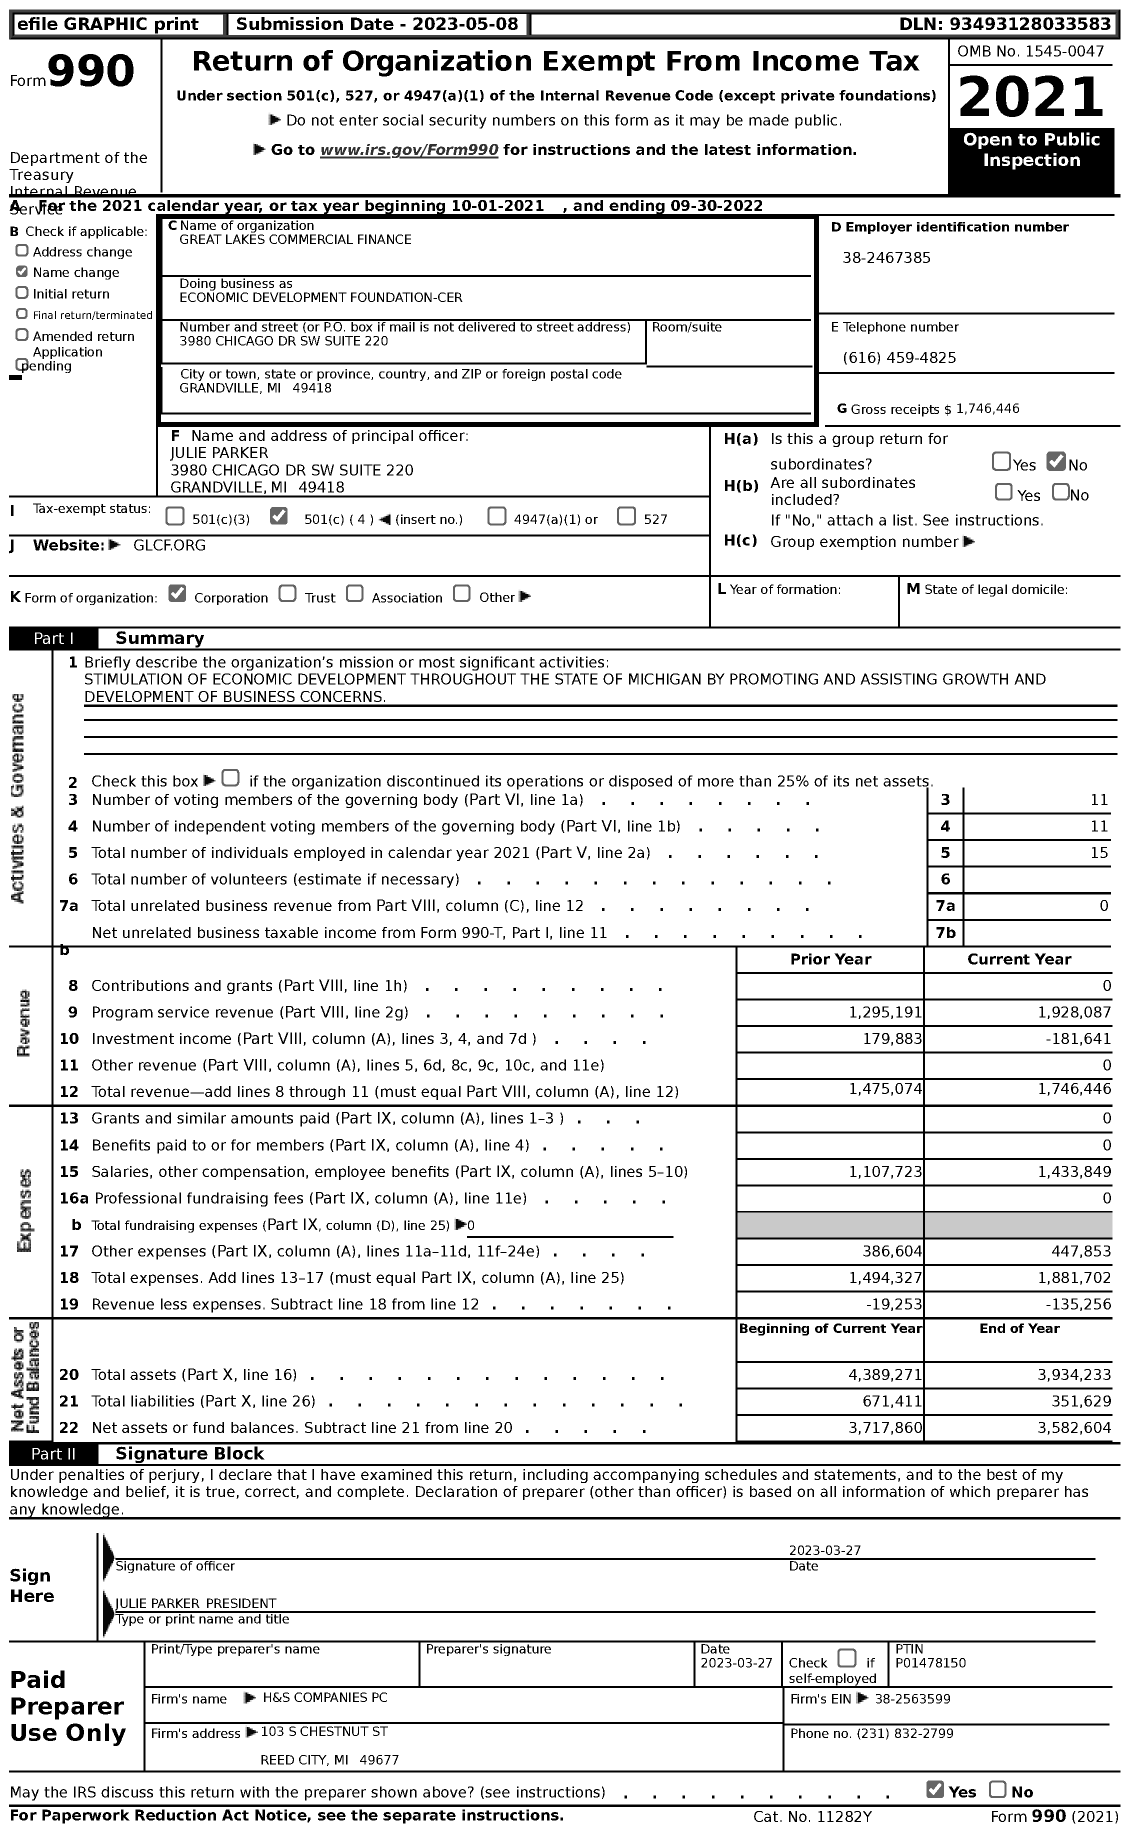 Image of first page of 2021 Form 990 for Economic Development Foundation-Cer